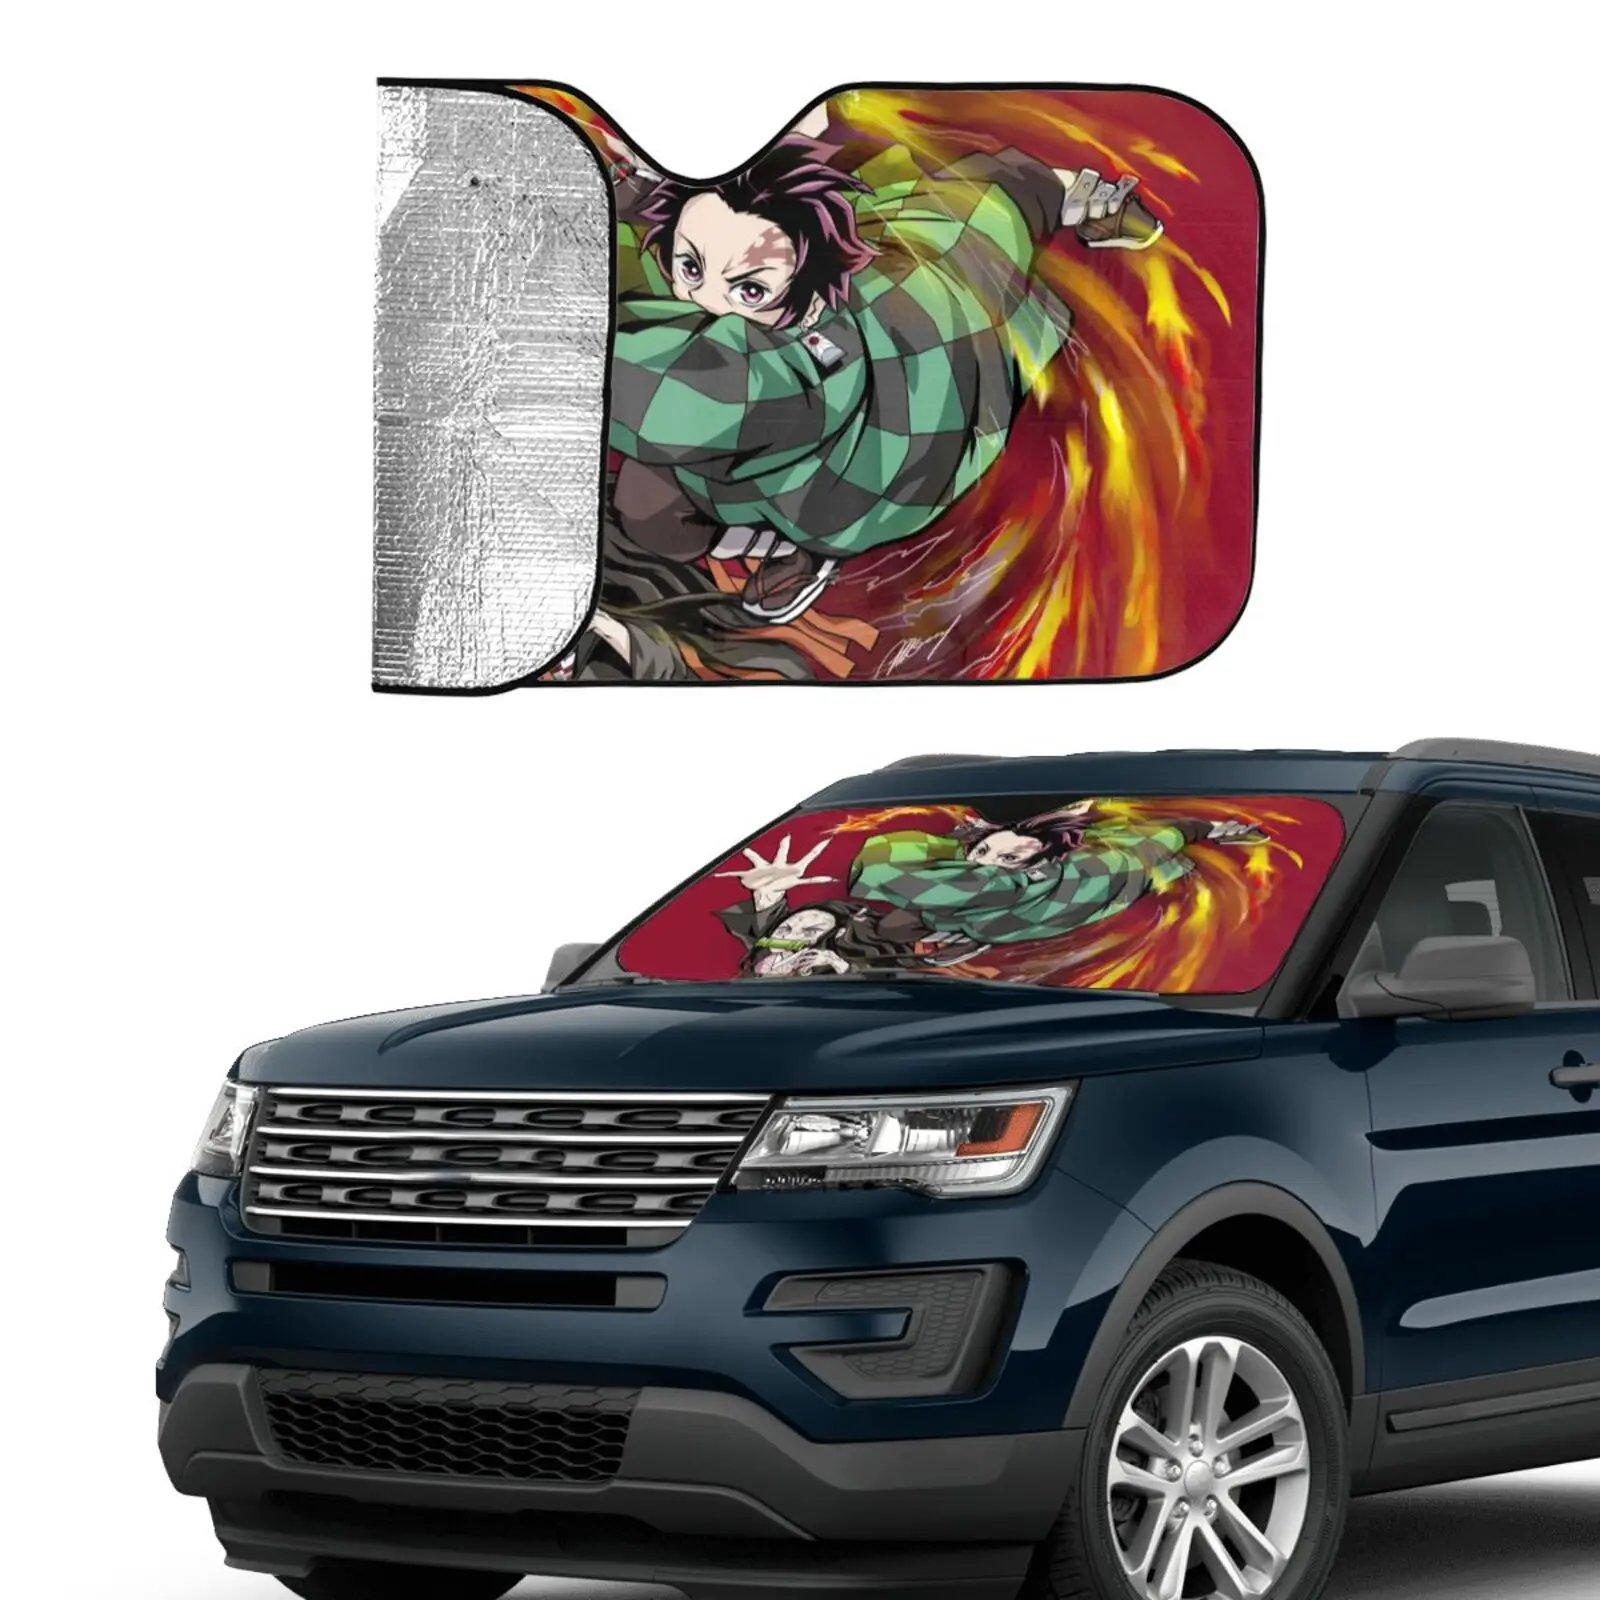 

3d Custom Design Demon Slayer Car Sunshade for Vehicle Suv Cool Down Universal Fits Most Cars